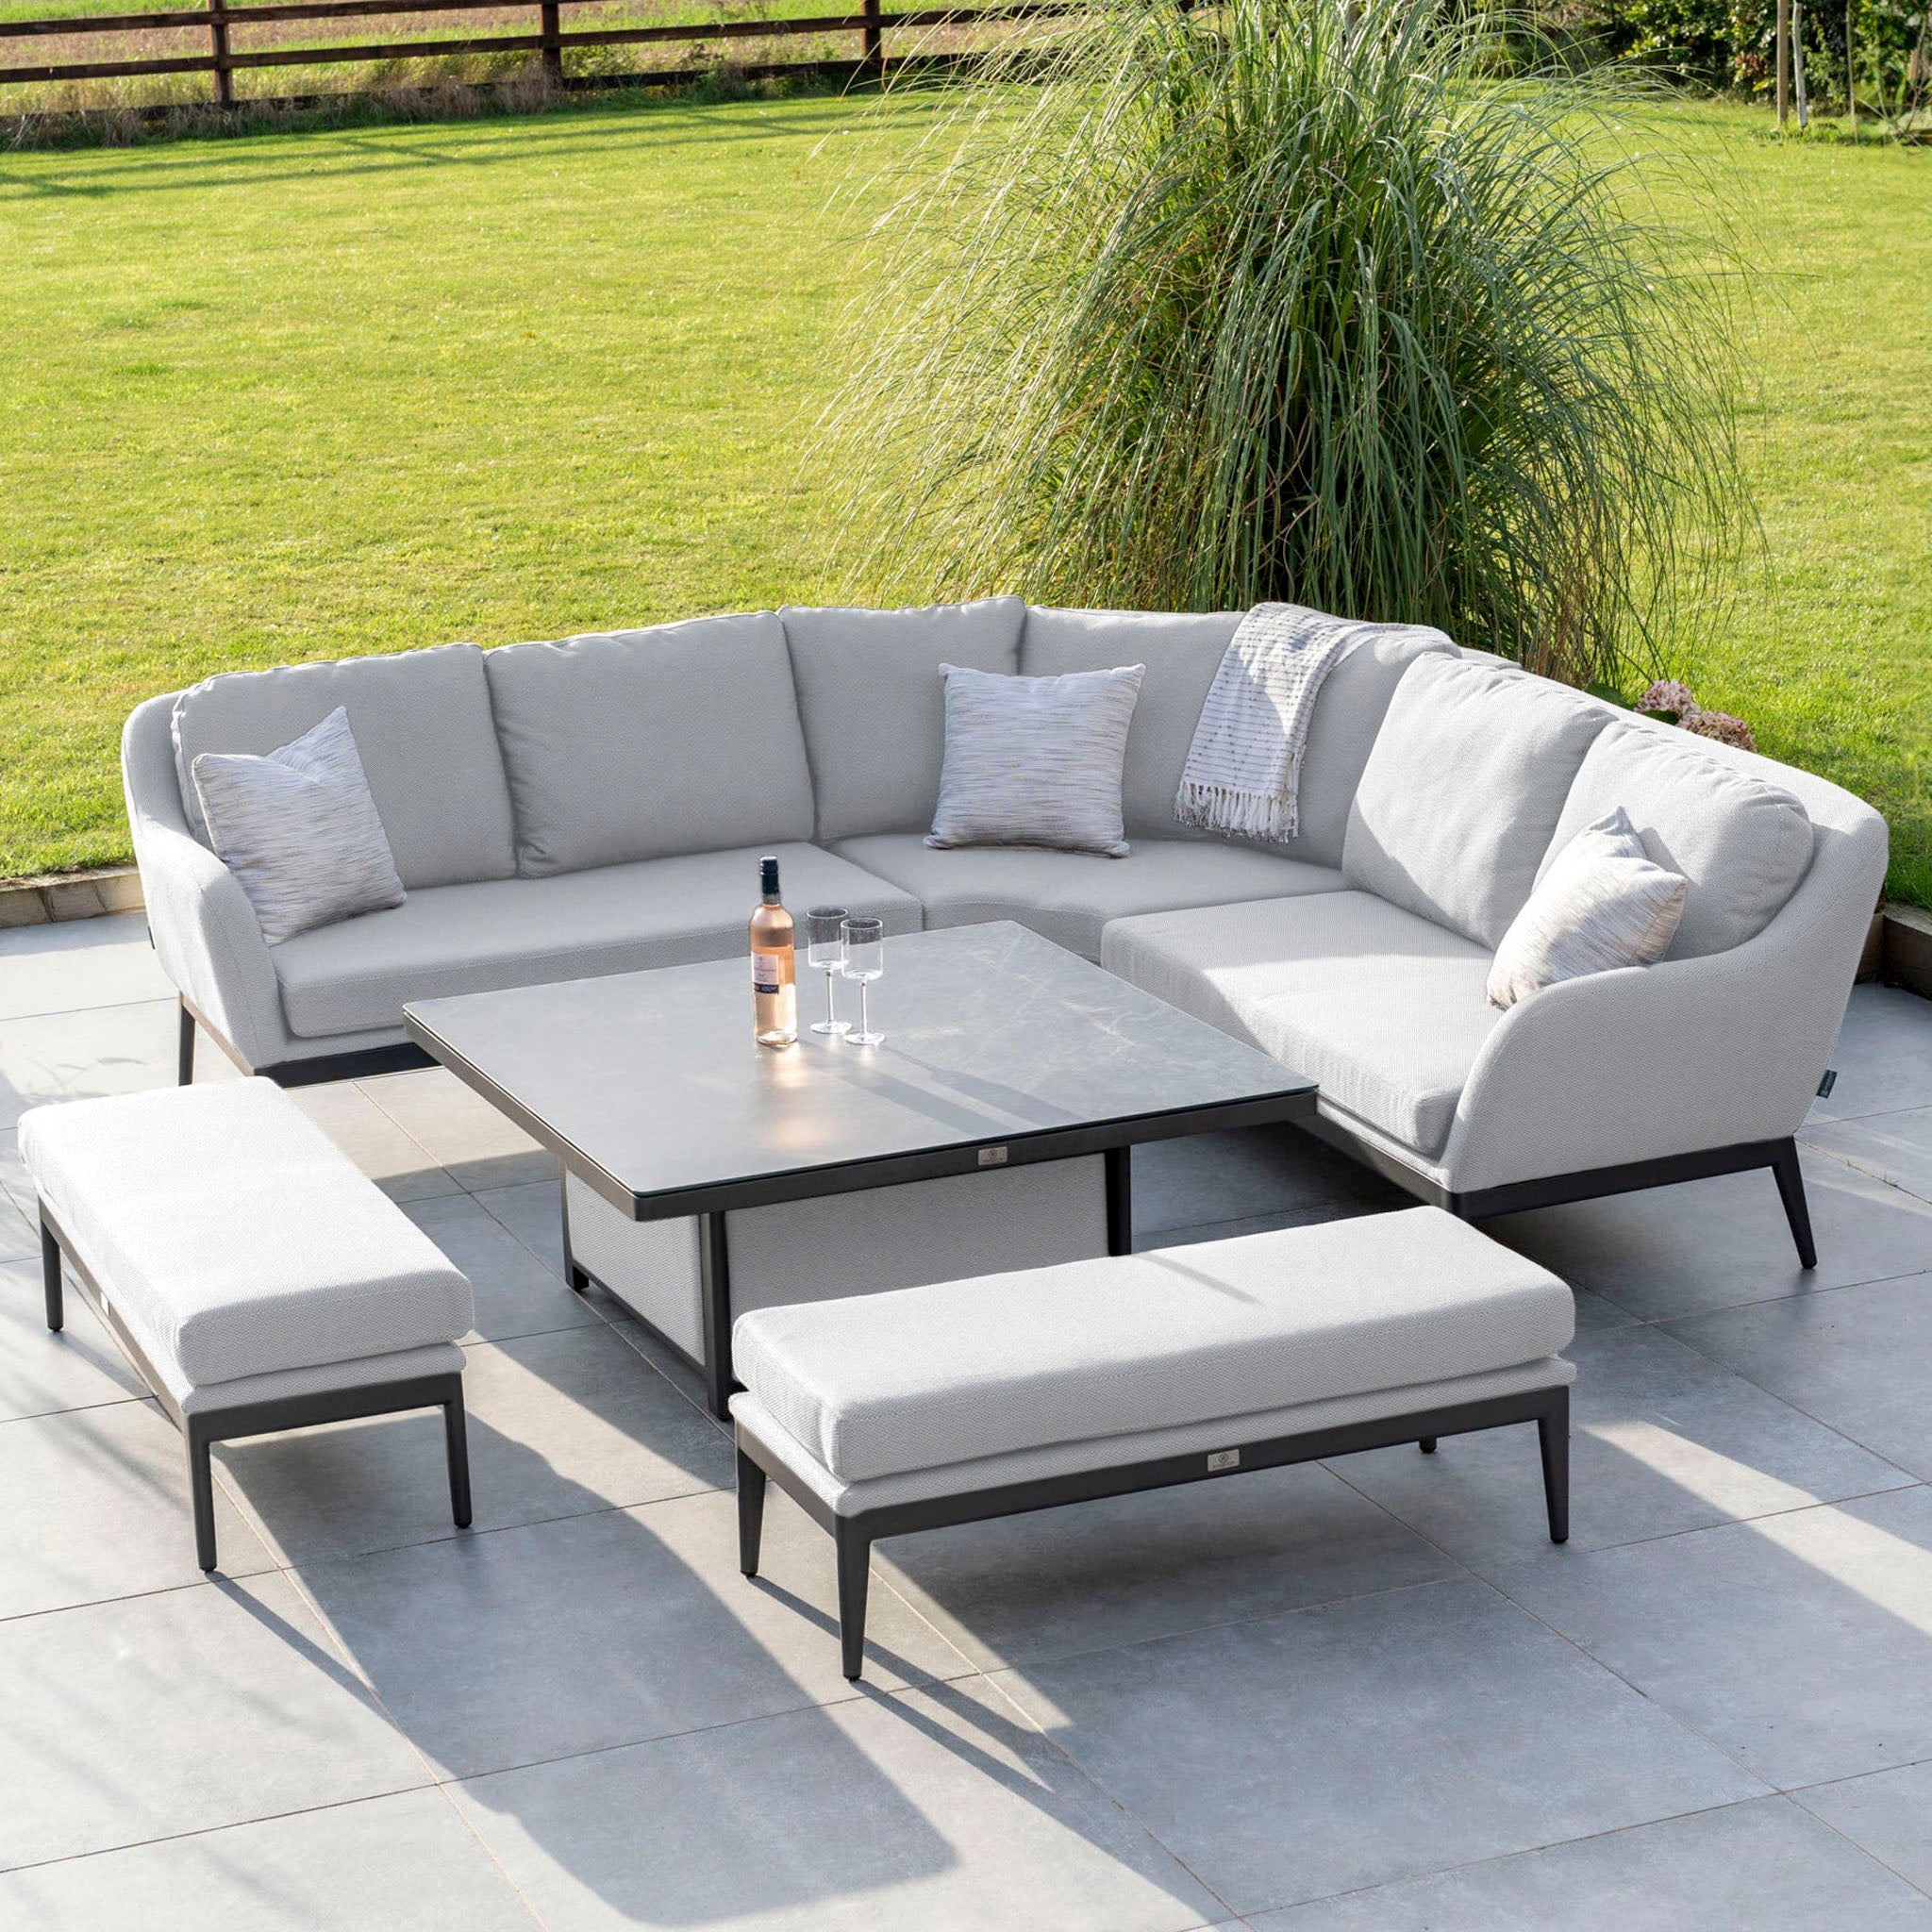 Luna Deluxe Outdoor Fabric Square Corner Dining Set with Rising Table in Oyster Grey